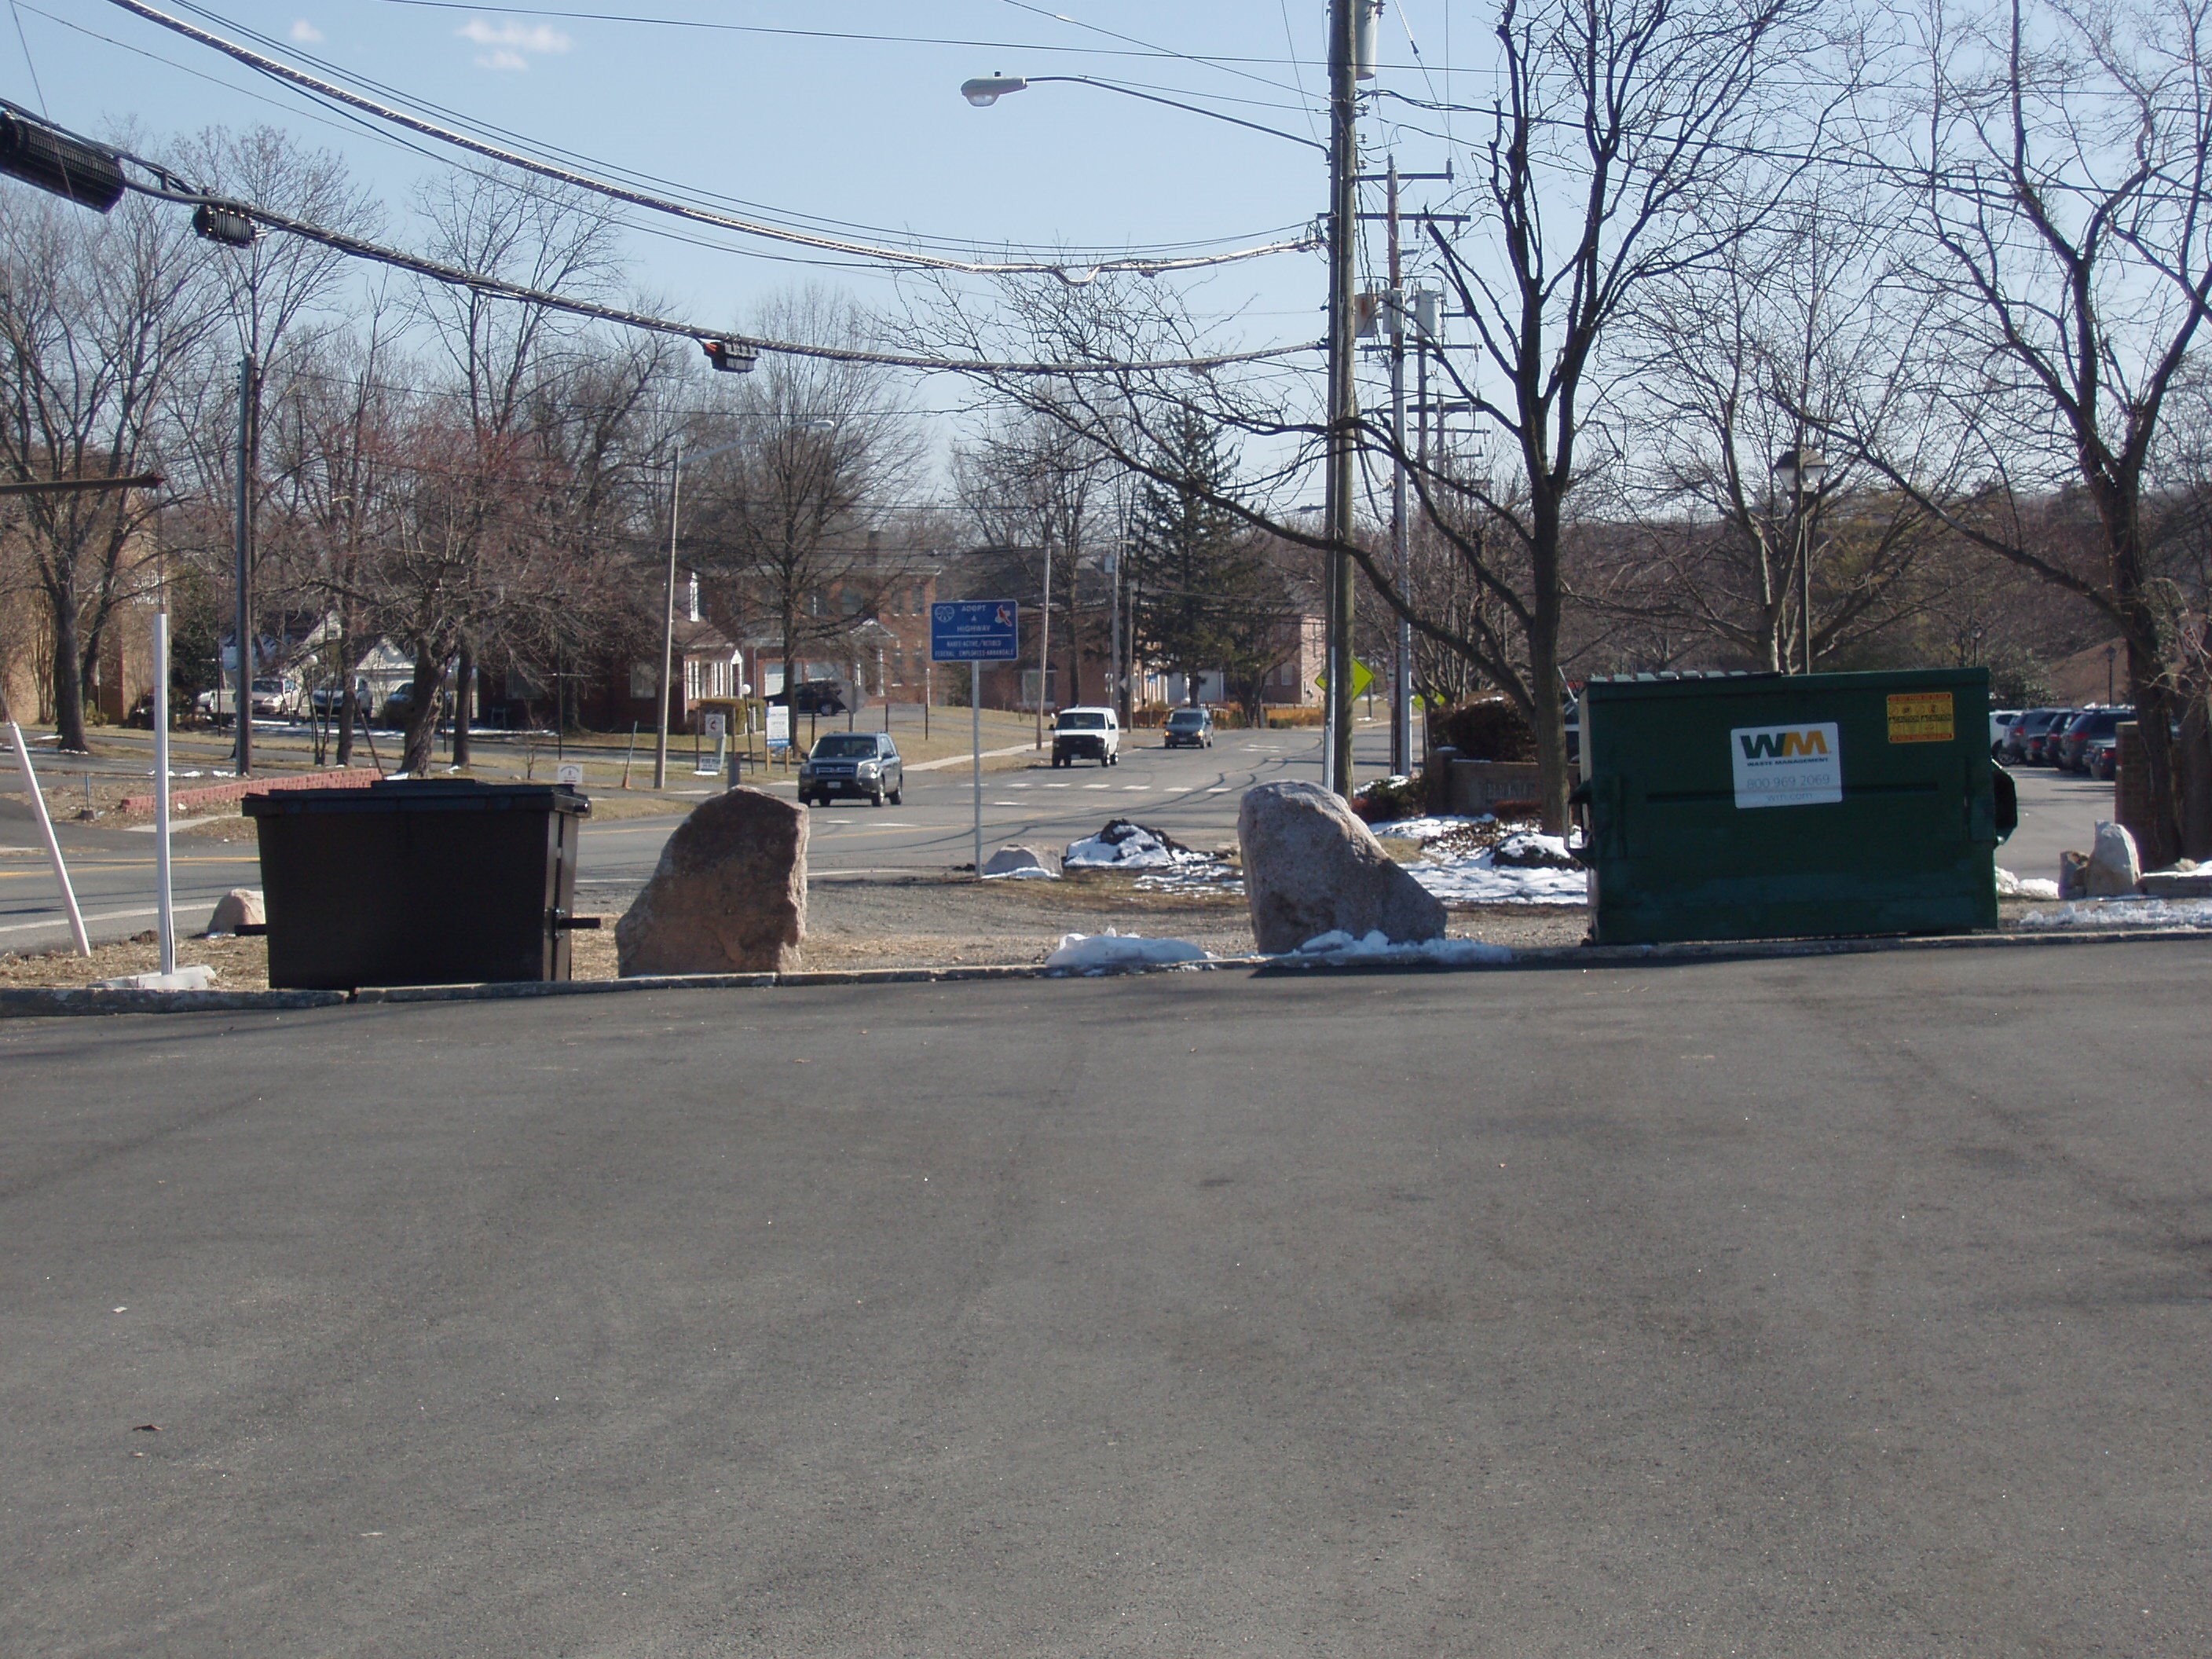 Dumpster and Grease Box in full view of two main streets.  How about taking some pride in this community, and operating within the codes?